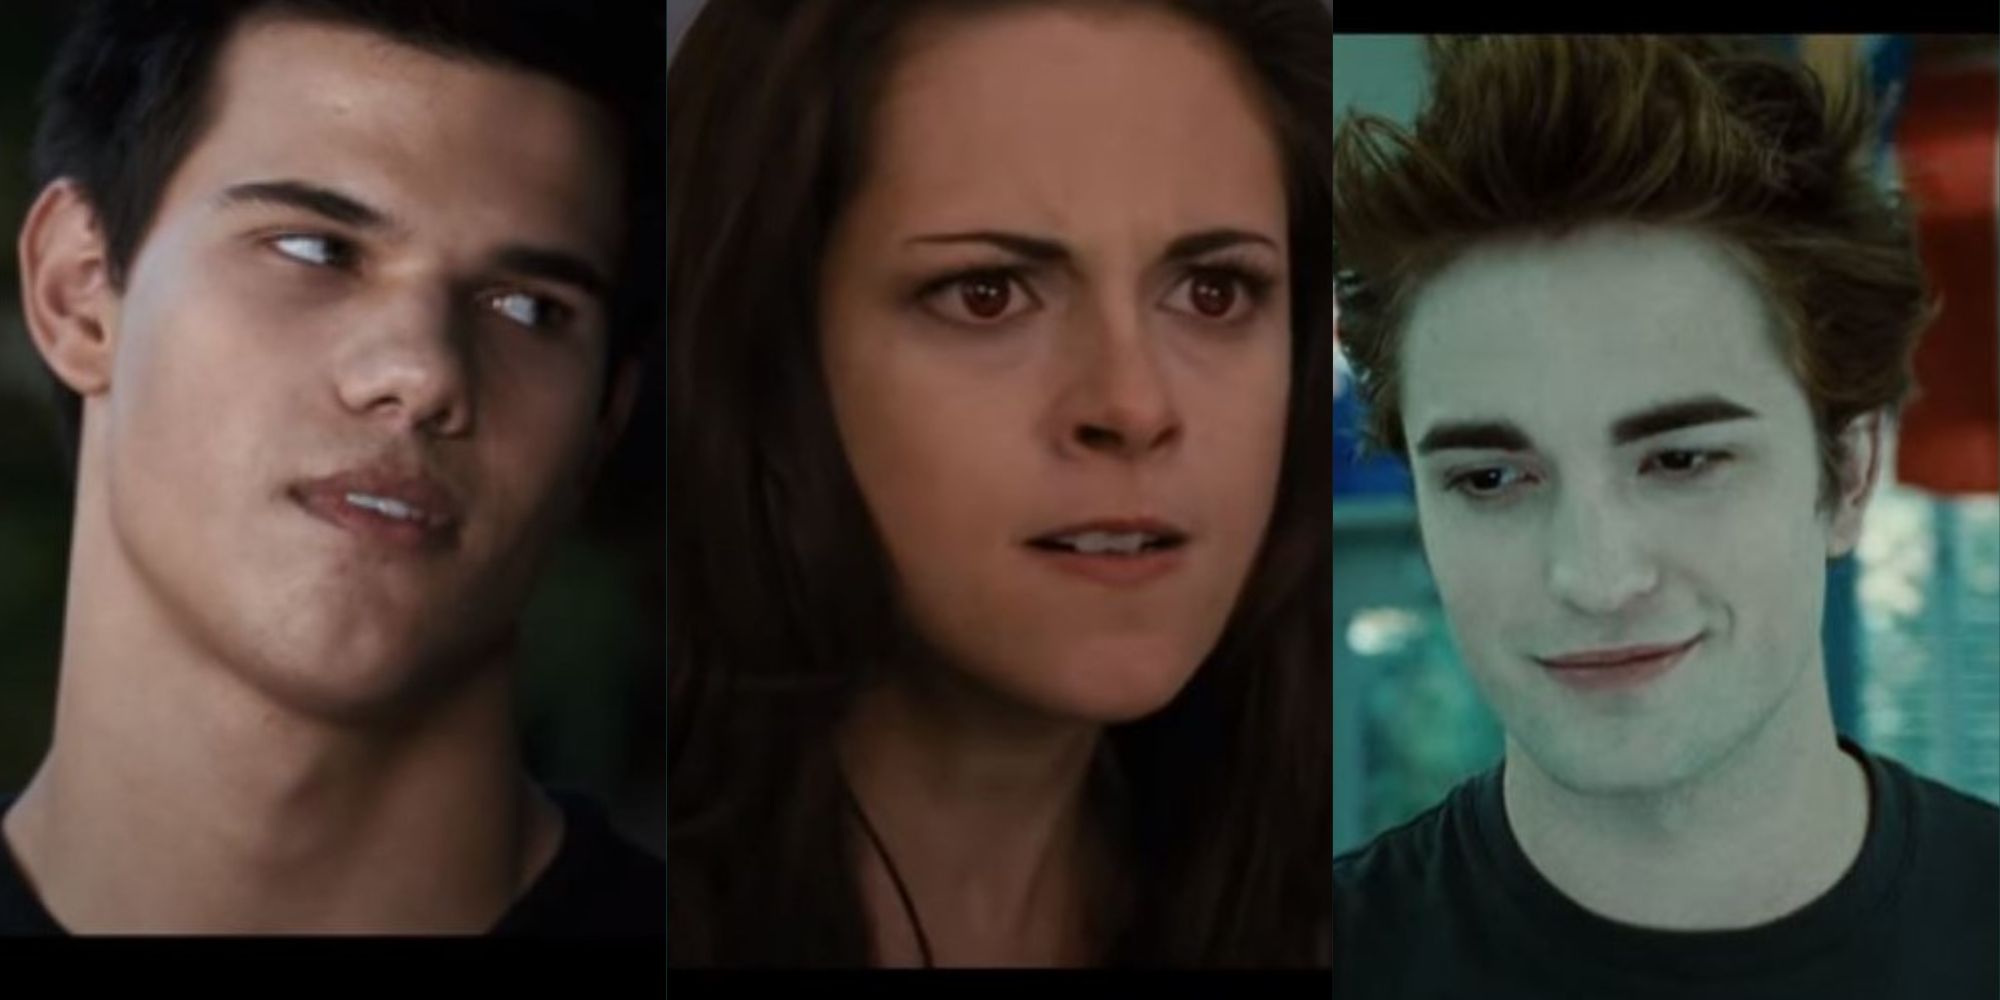 10 Cringey Yet Charming Lines From The 'Twilight' Movies